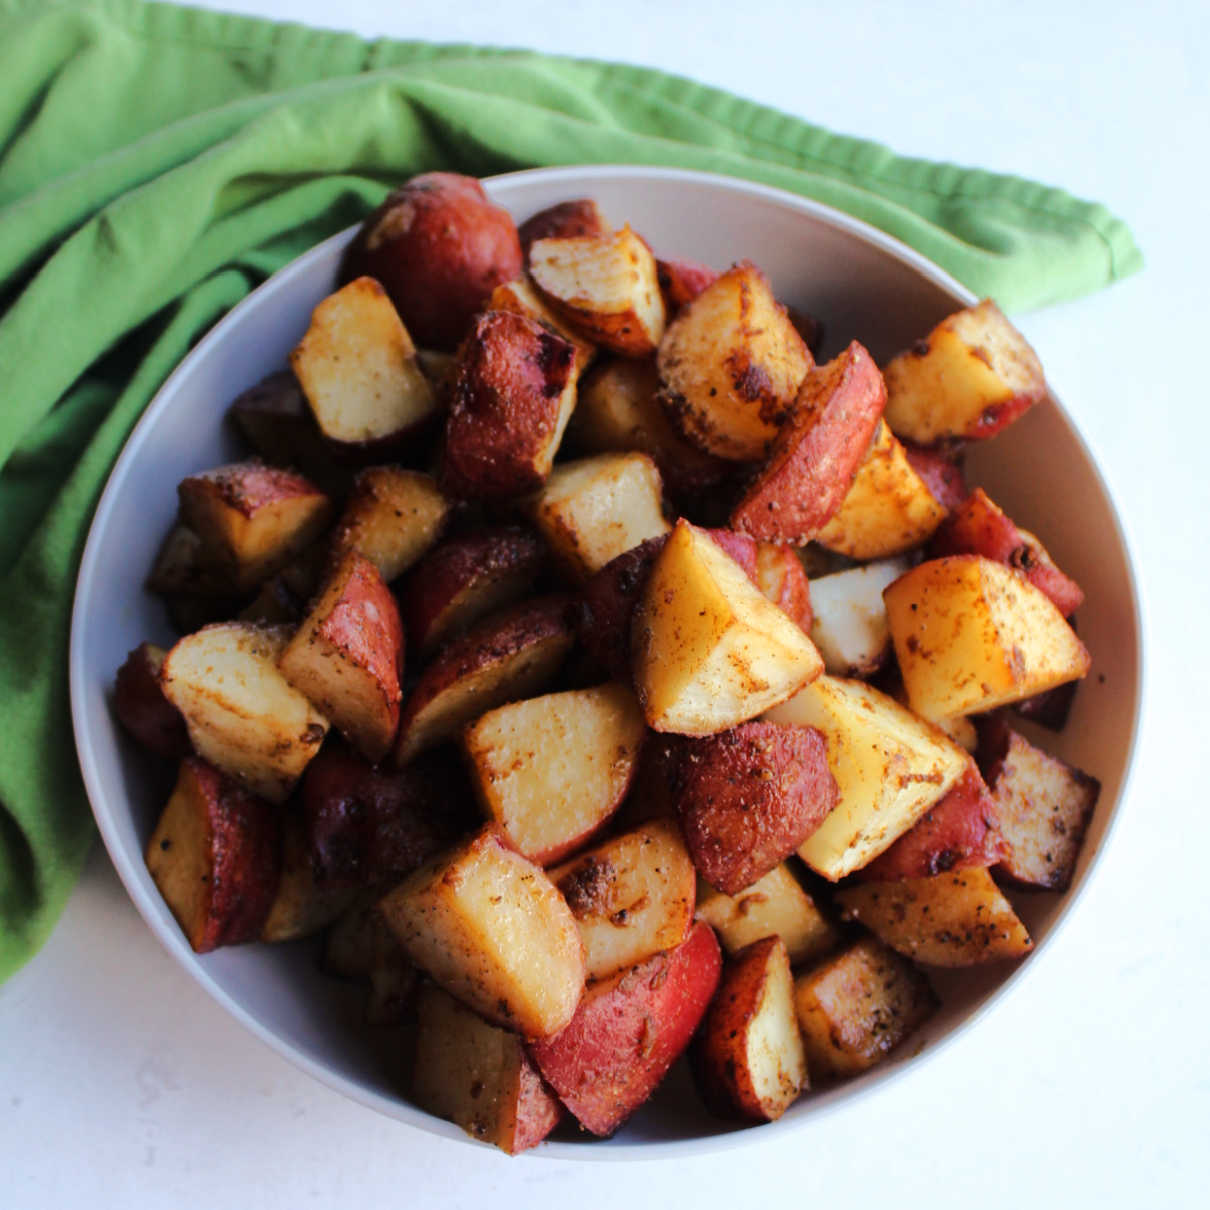 Serving bowl filled with chunks of roasted red skin potatoes coated in seasonings, ready to eat.